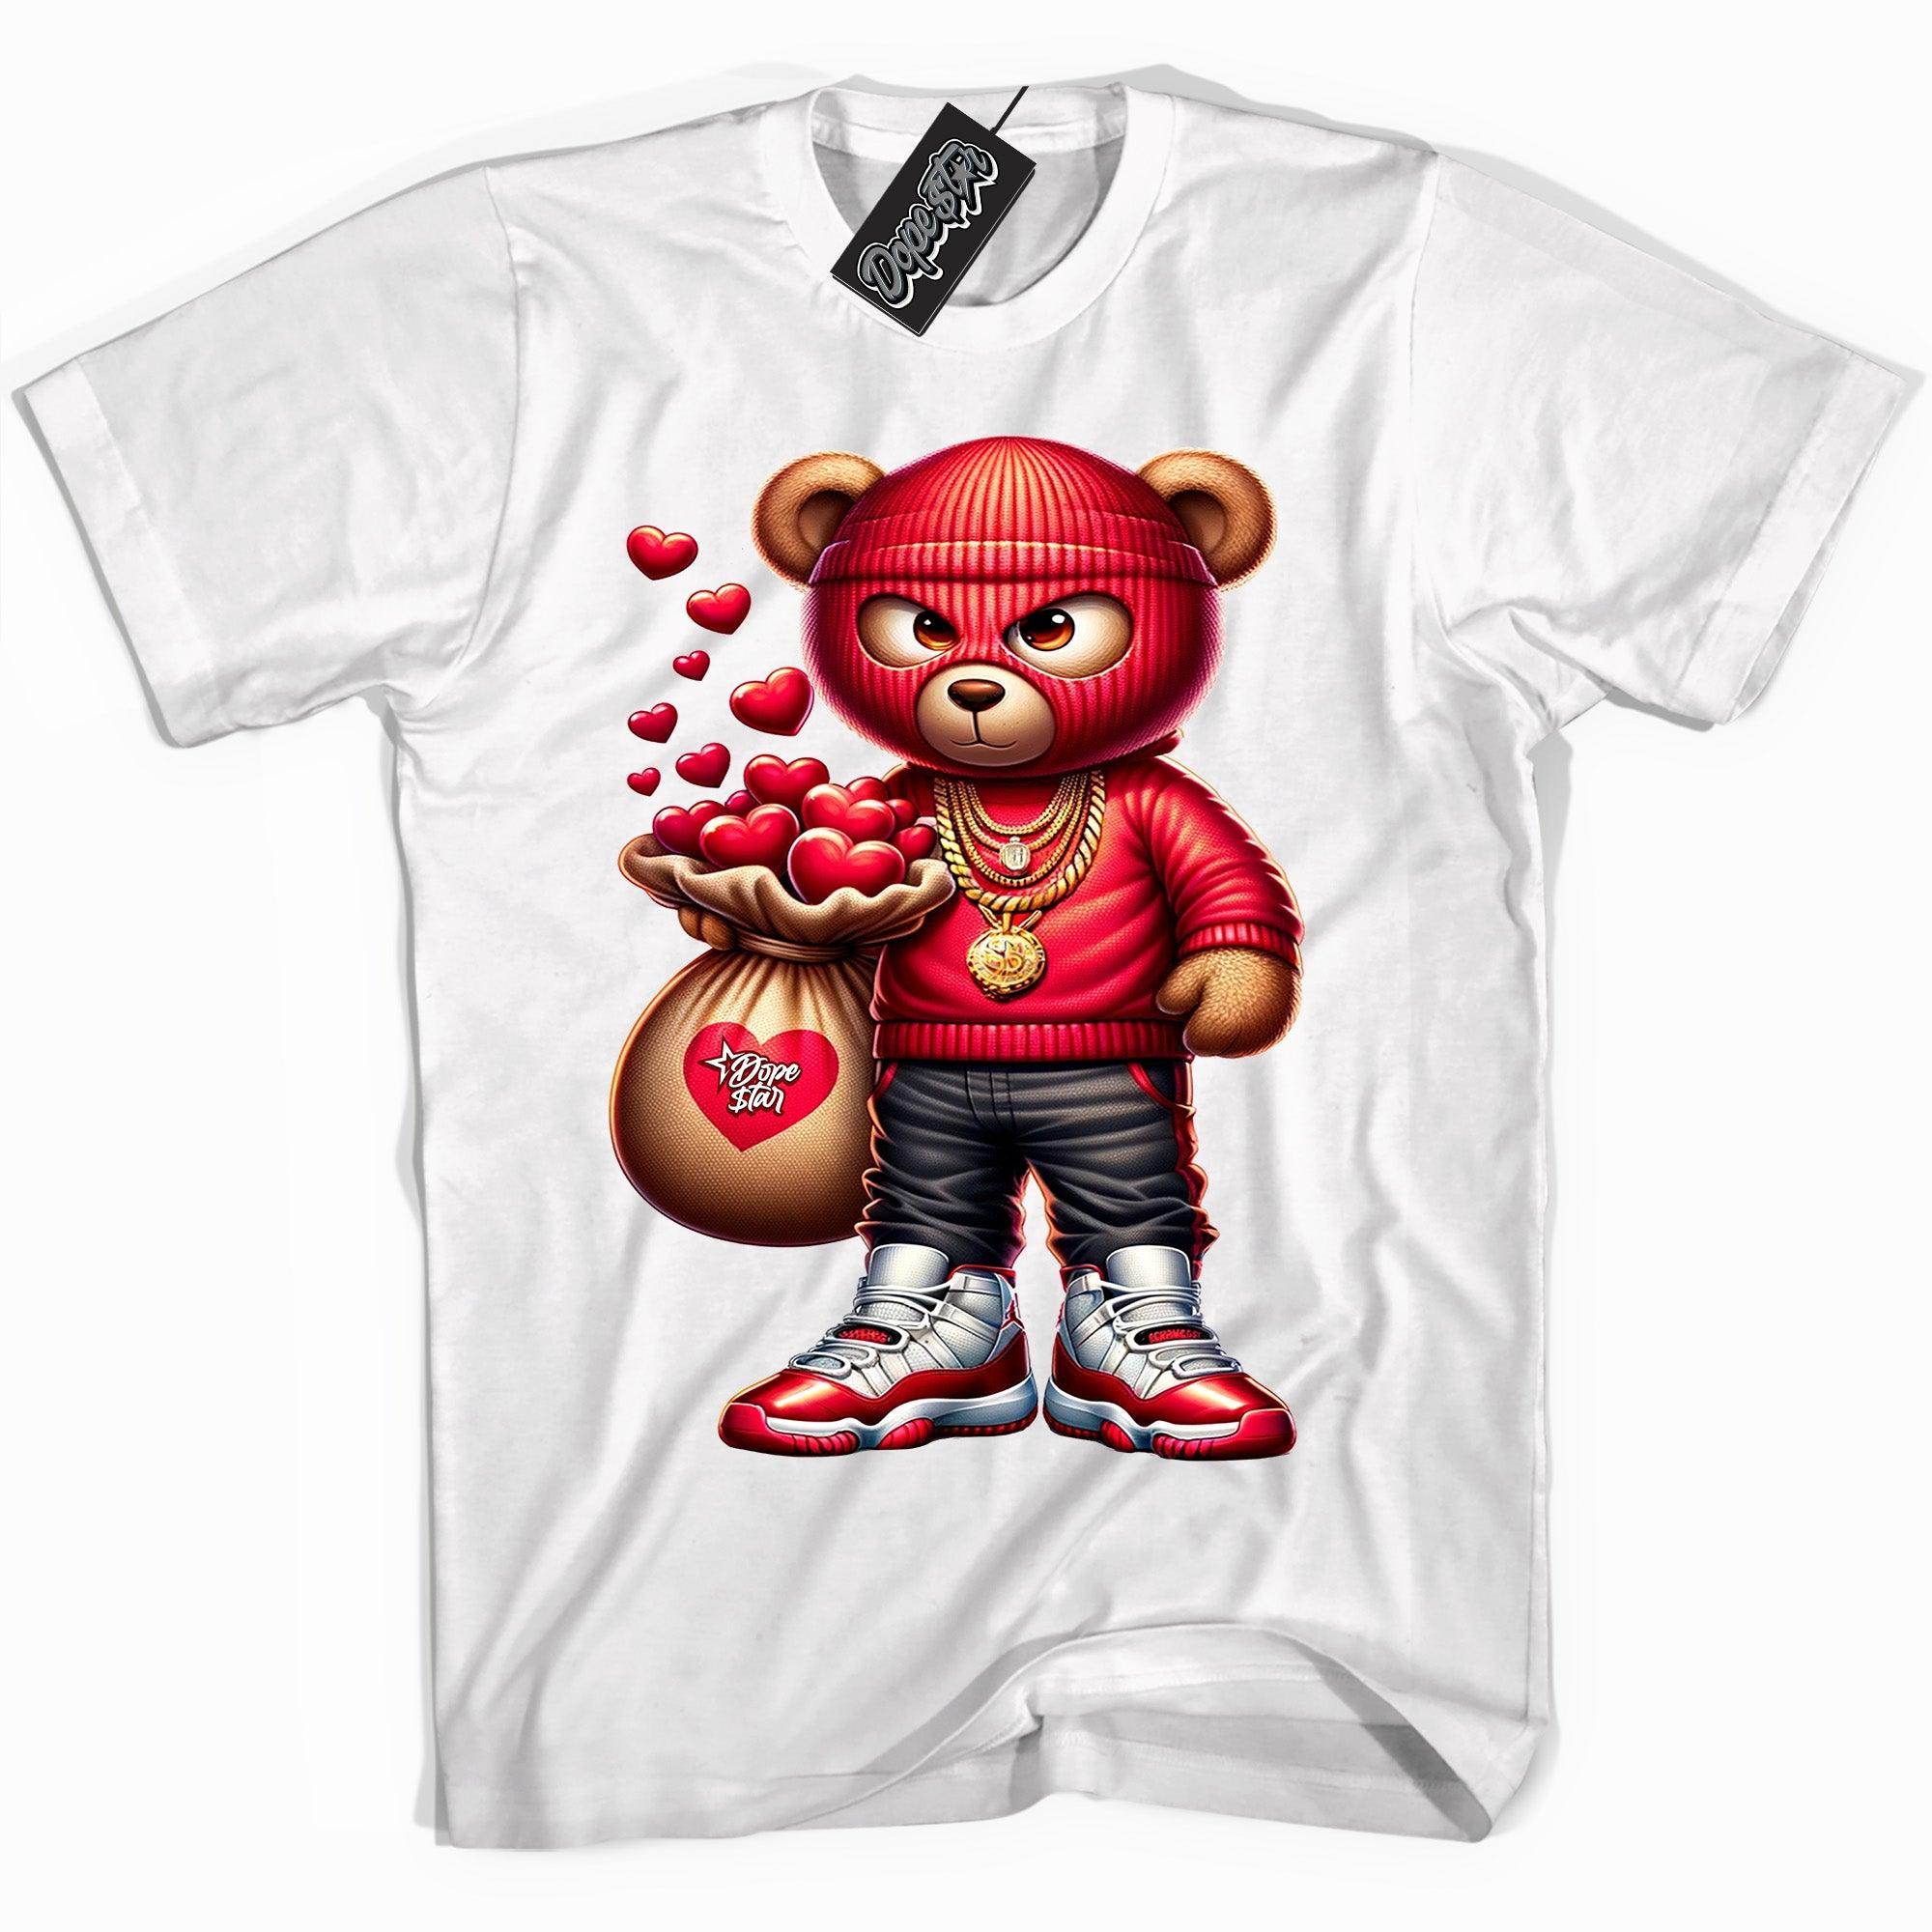 Cool White graphic tee with “ Valentine Thief ” print, that perfectly matches Air Jordan 11 Cherry sneakers 